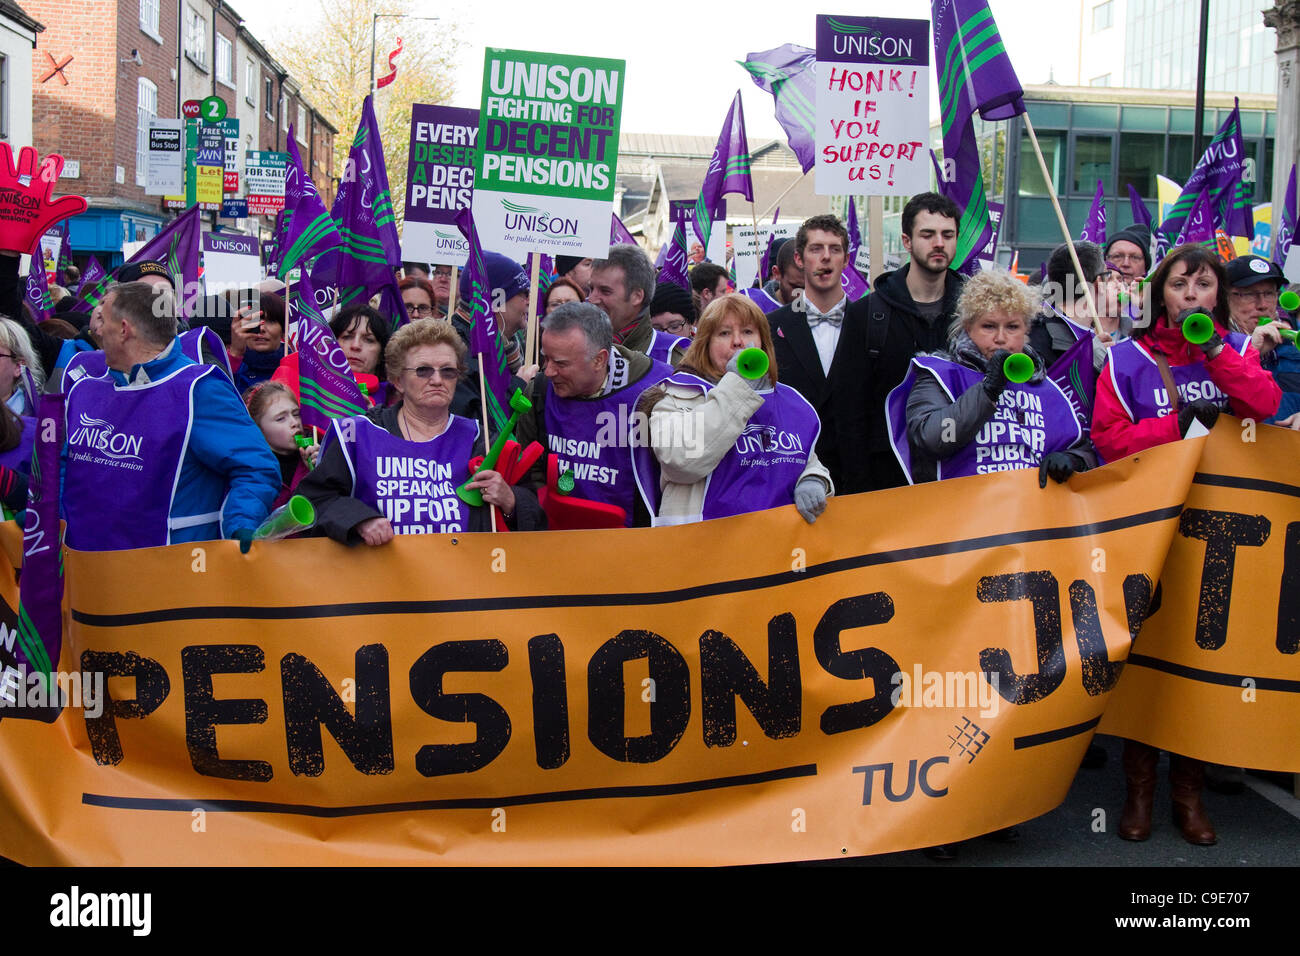 Unison March Manchester, UK. 30th Nov, 2011. Striking public sector workers march in Manchester City Centre in protest over Government pension plans. displaying large 'pensions Justice' banner. Stock Photo